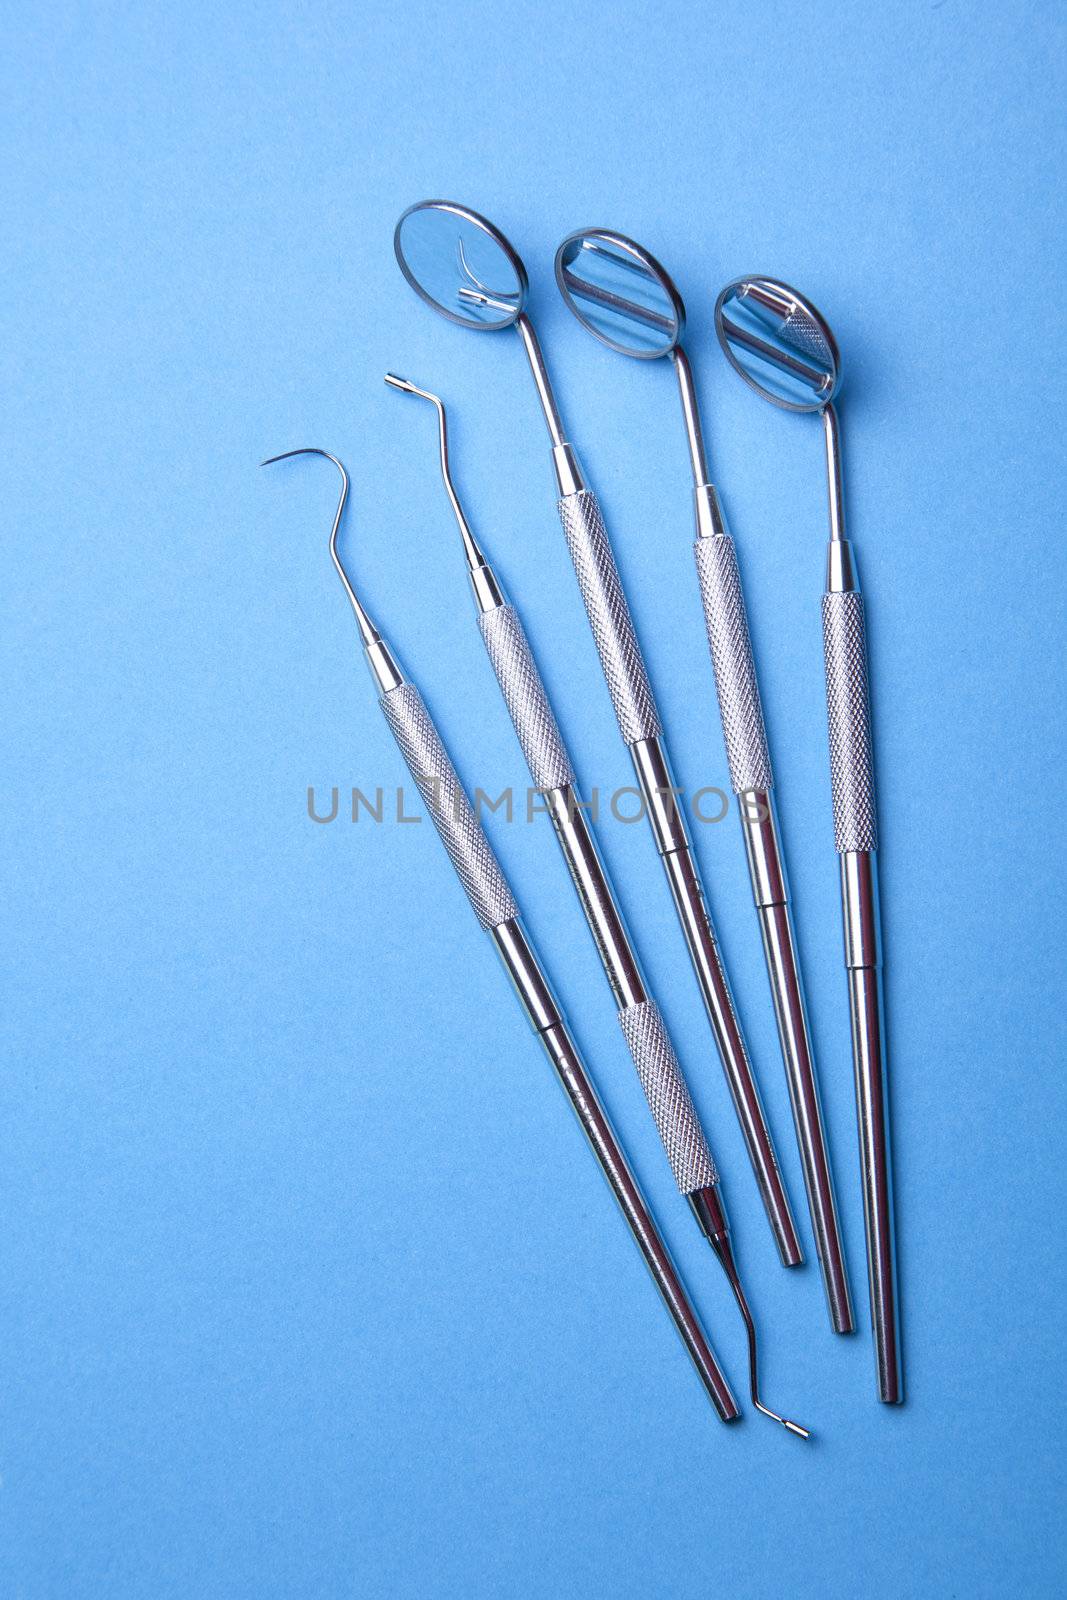 Dental Instruments - Angled Mirror, Group of Objects by adamr